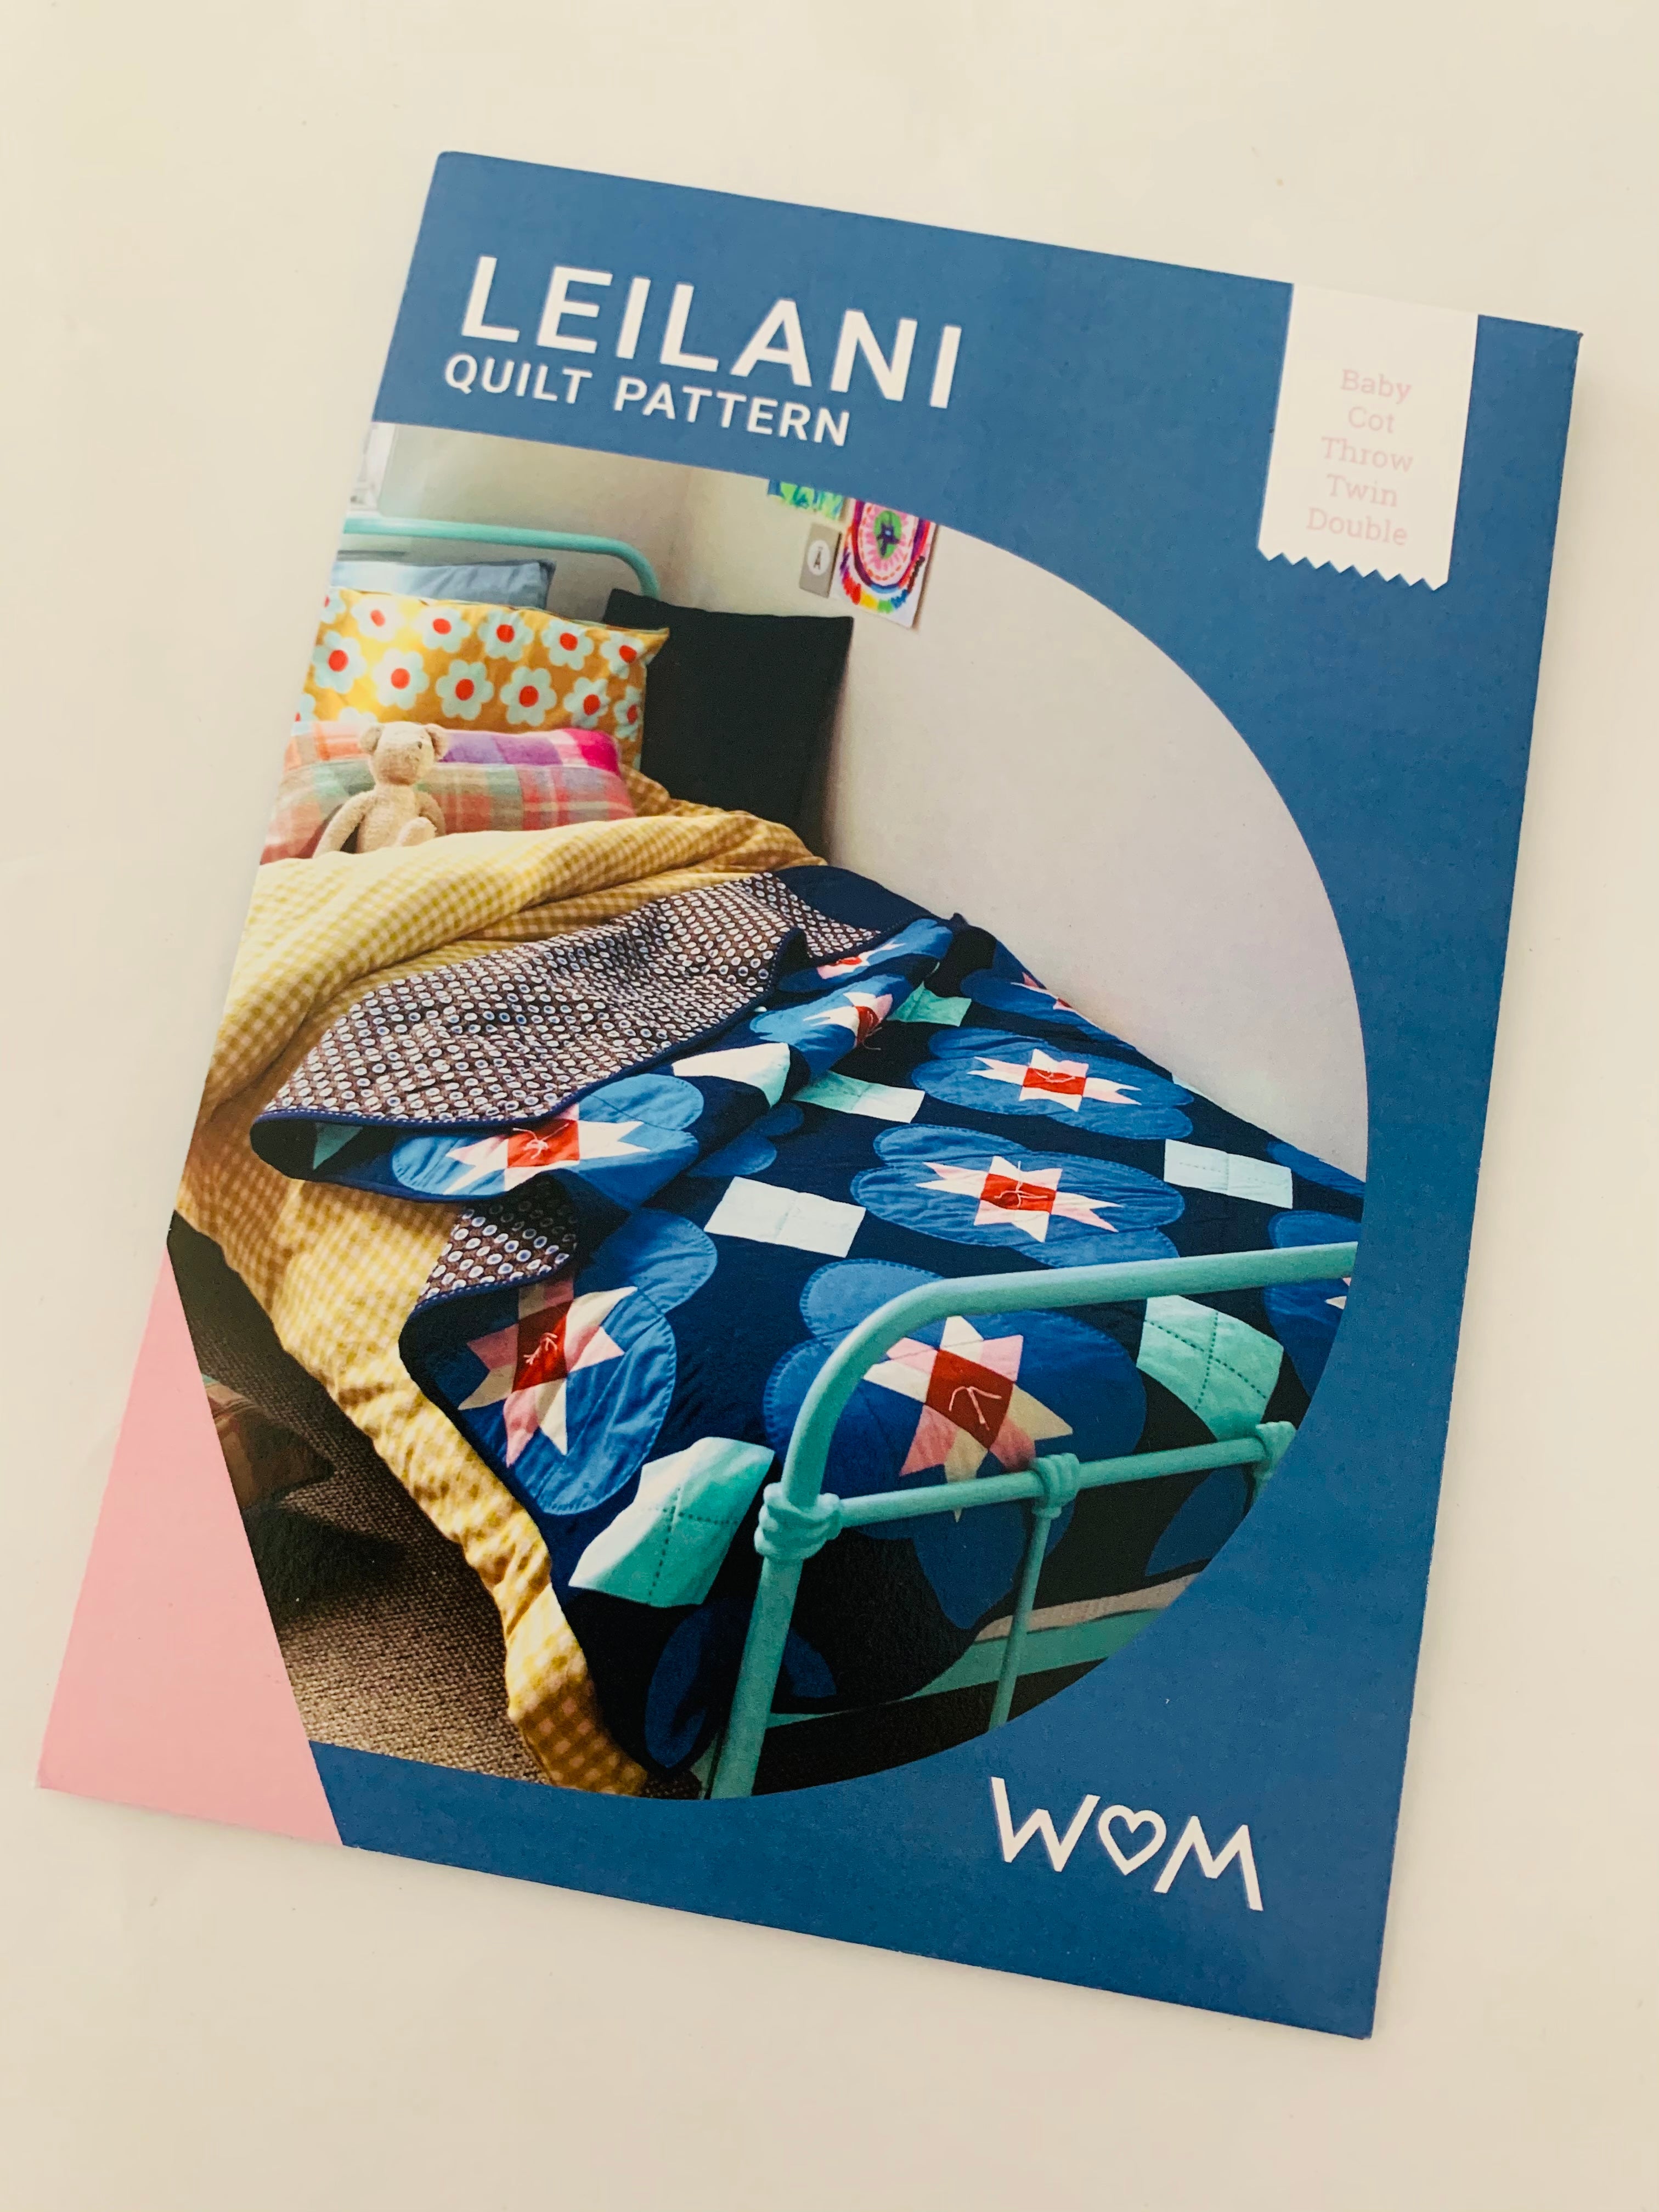 Wife Made: Leilani quilt pattern